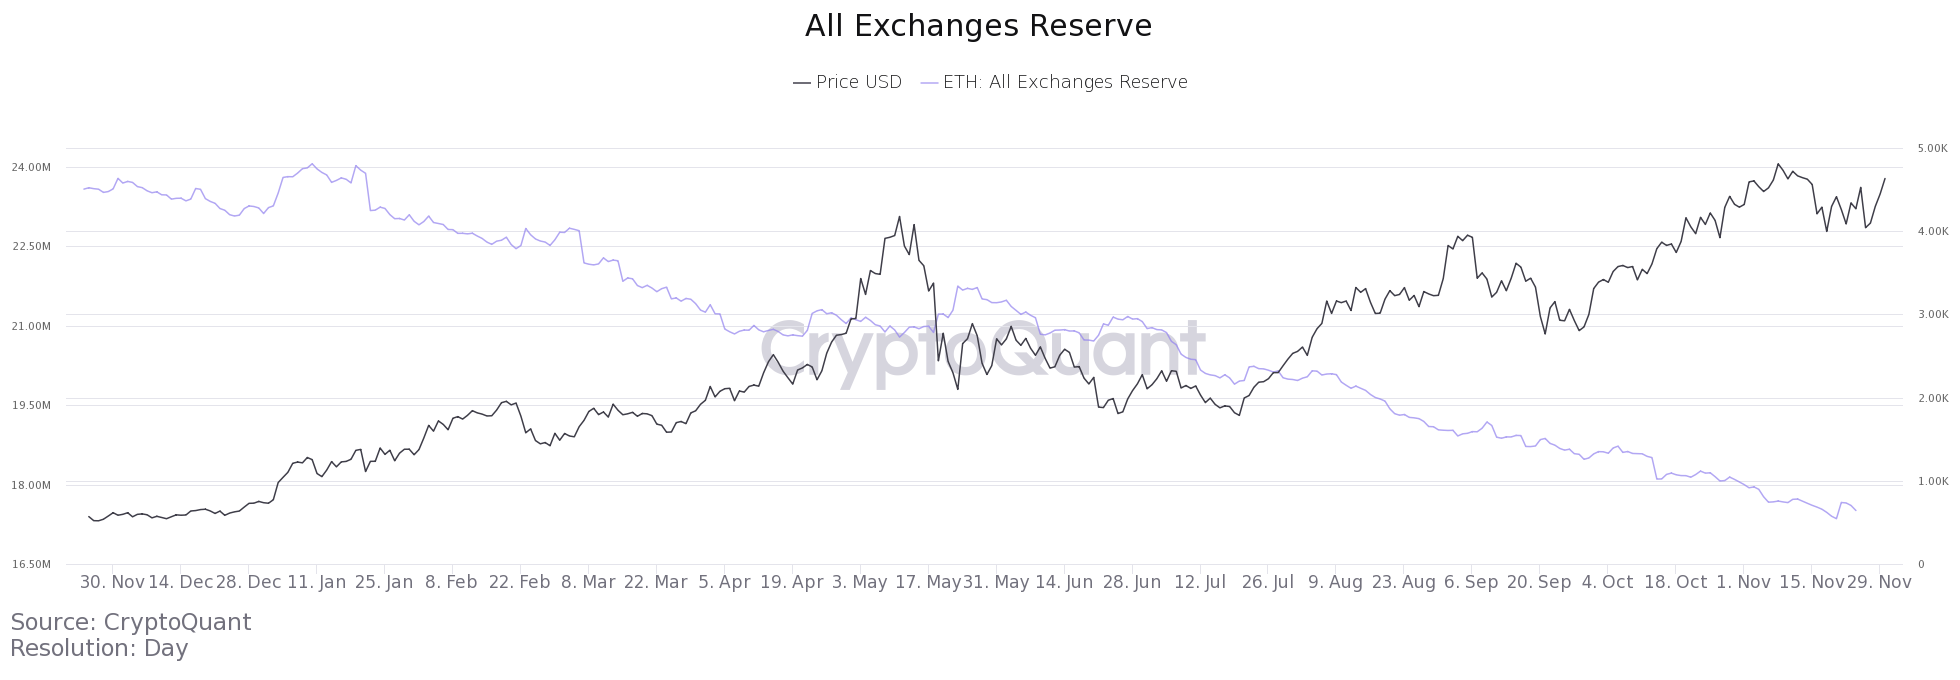 ETH reserves on the stock exchange.  Source: CryptoQuant